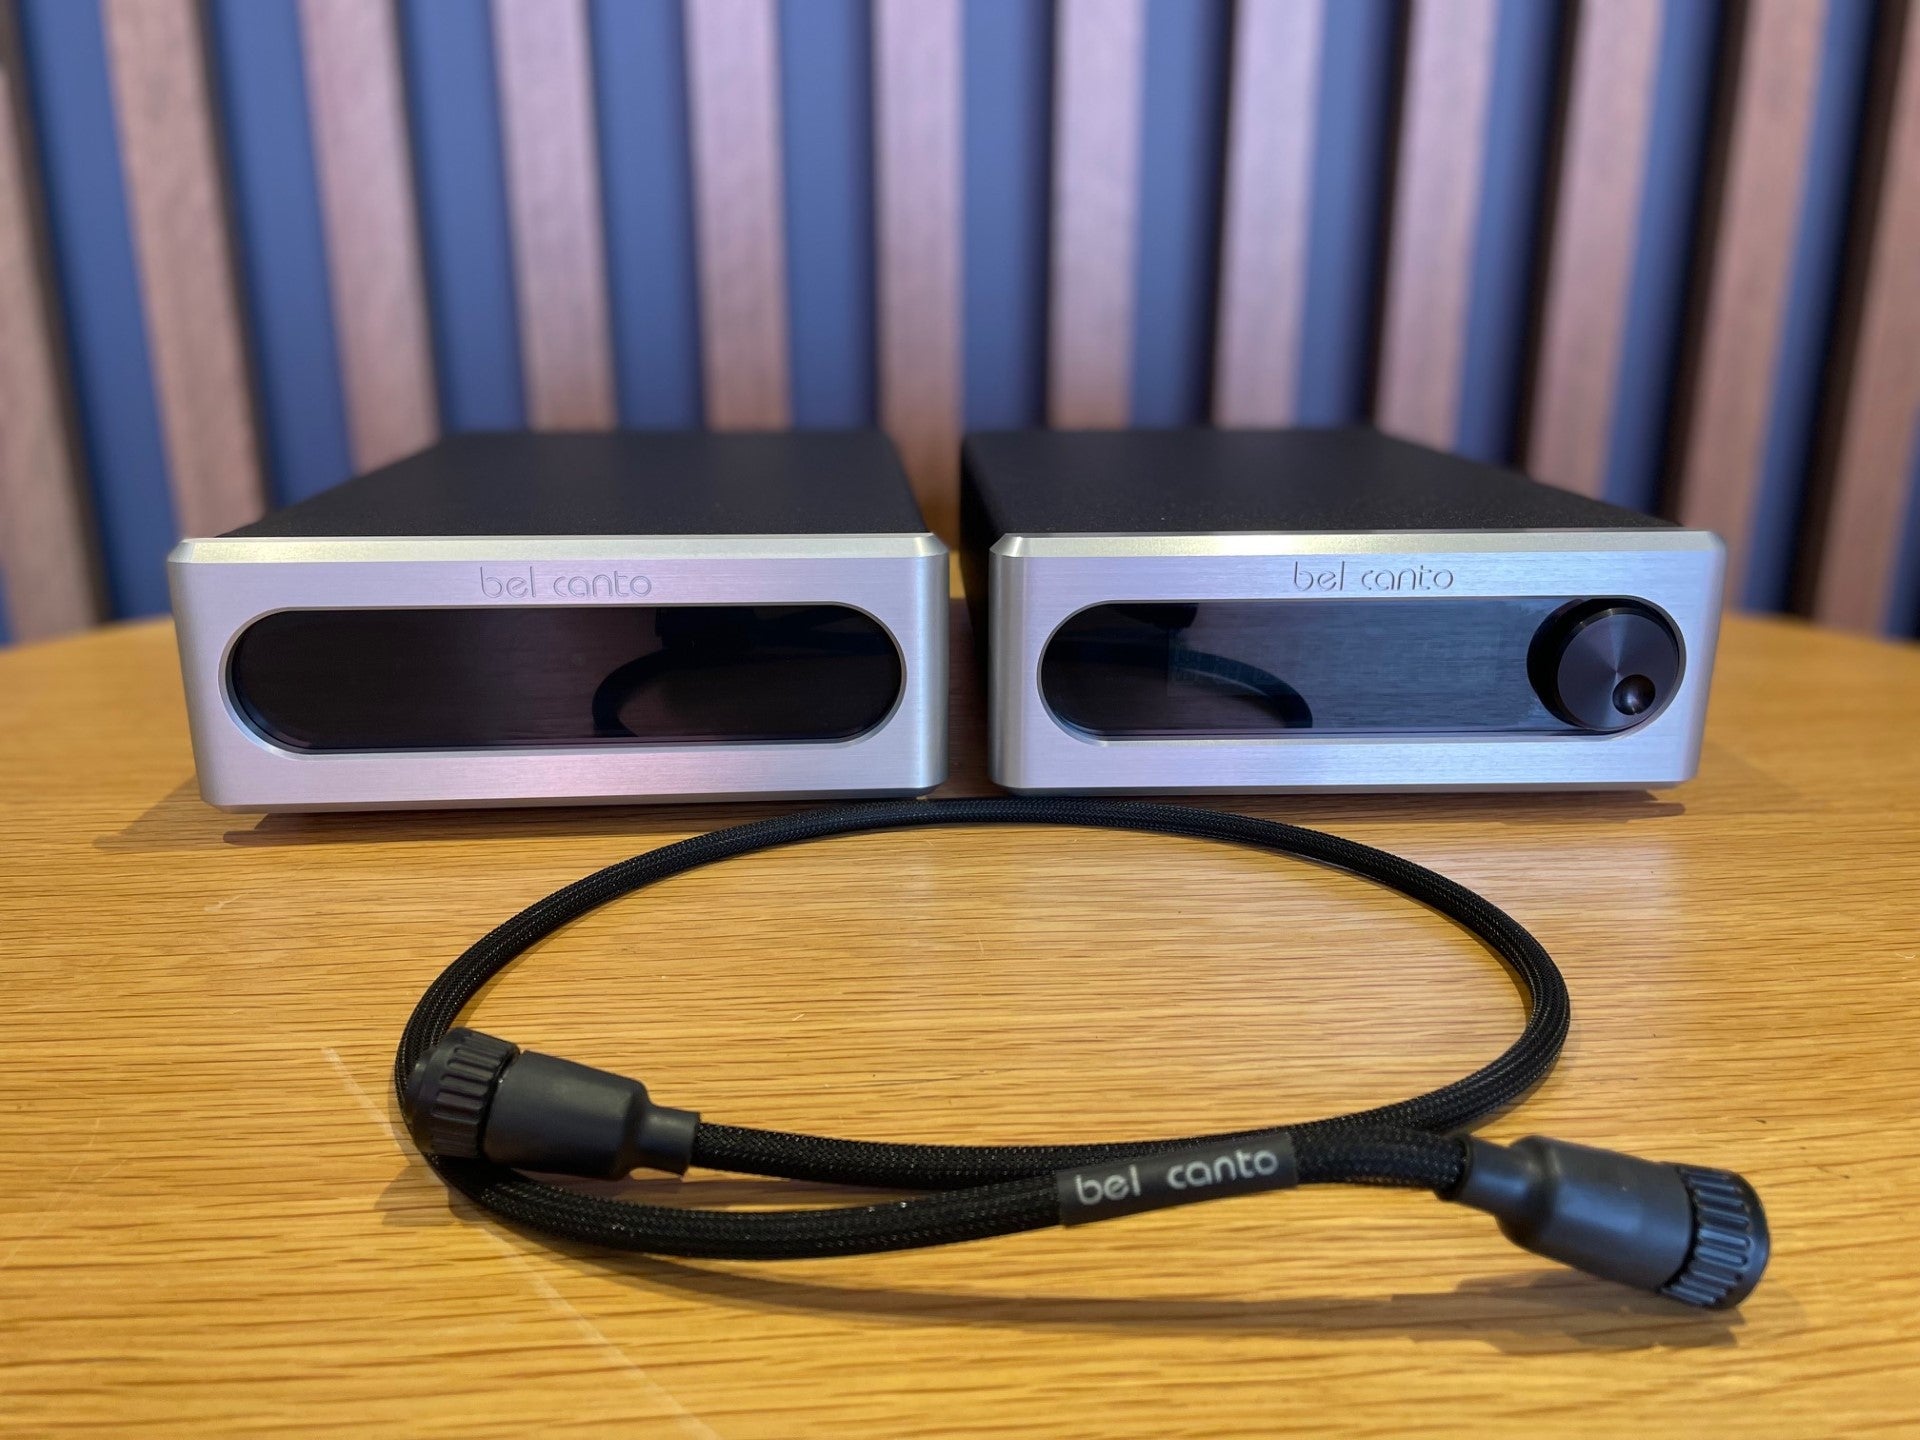 Bel Canto e.One DAC 3.7 and VBL1 Power Supply - Consignment